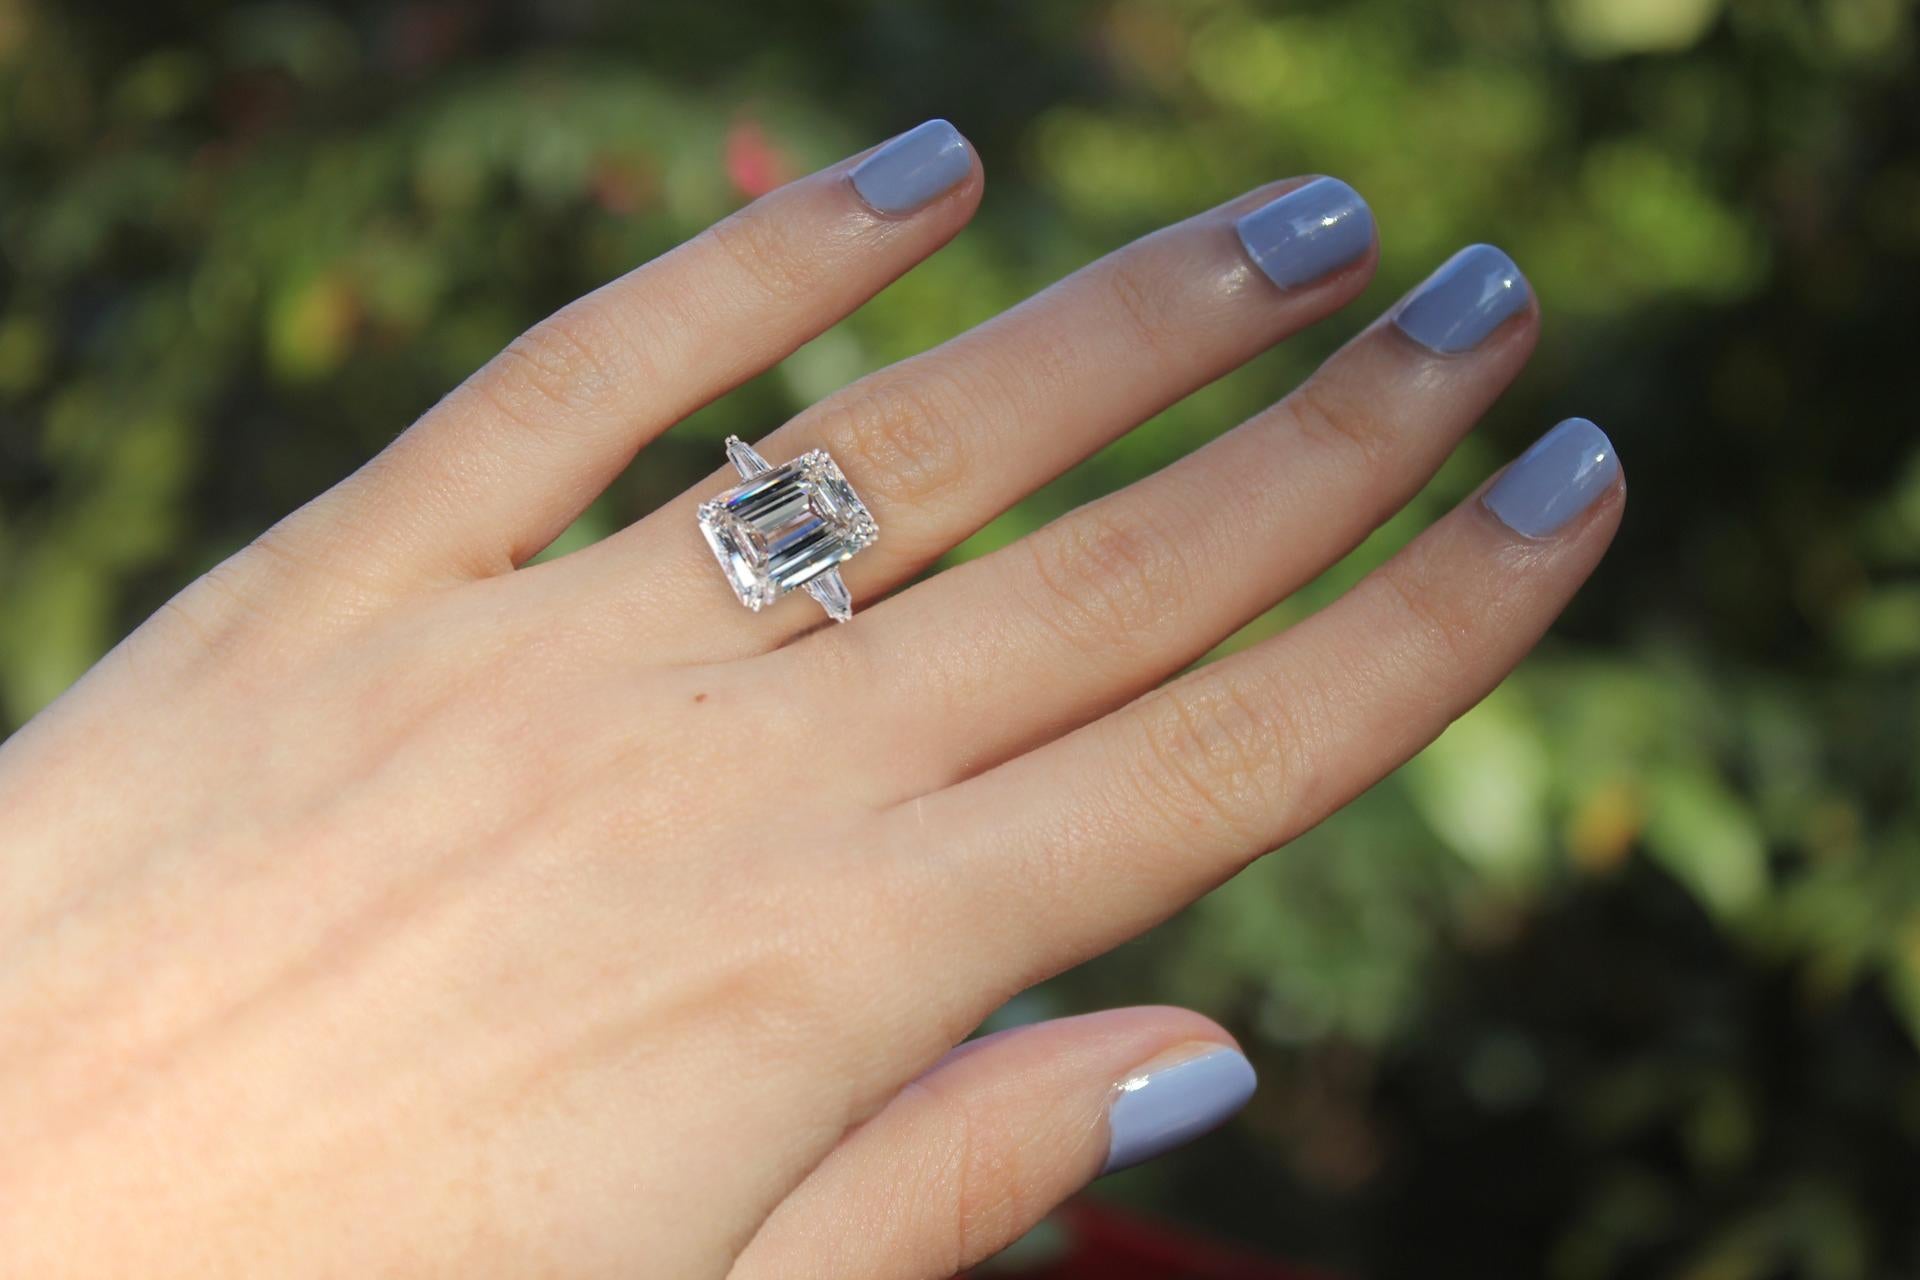 An exceptional emerald cut diamond ring the main stone weights 5 carats  is a very white G color clarity is vs2 100% eye clean stone and has excellent polish and cut with none fluorescence.

This diamond has the perfect proportion so it actually